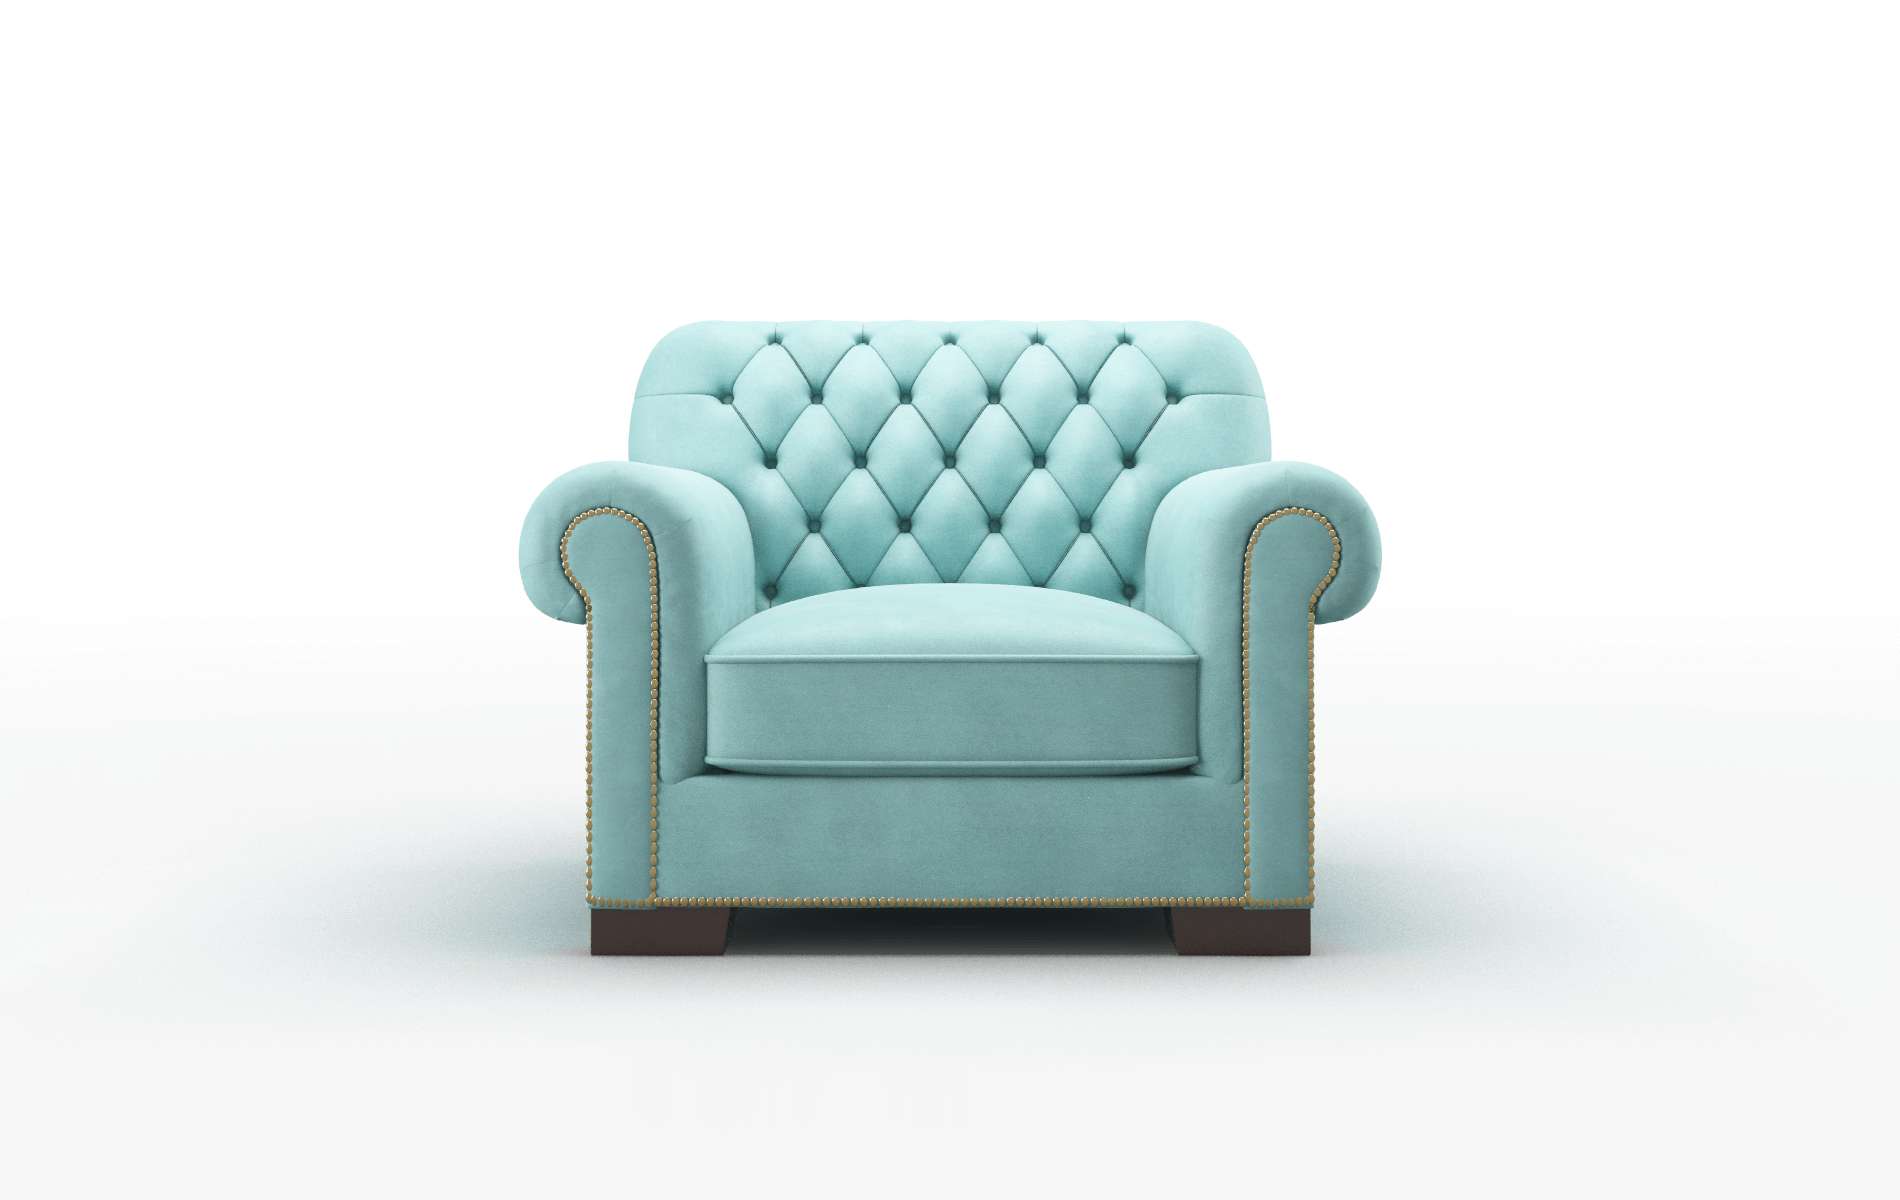 Chester Curious Turquoise chair espresso legs